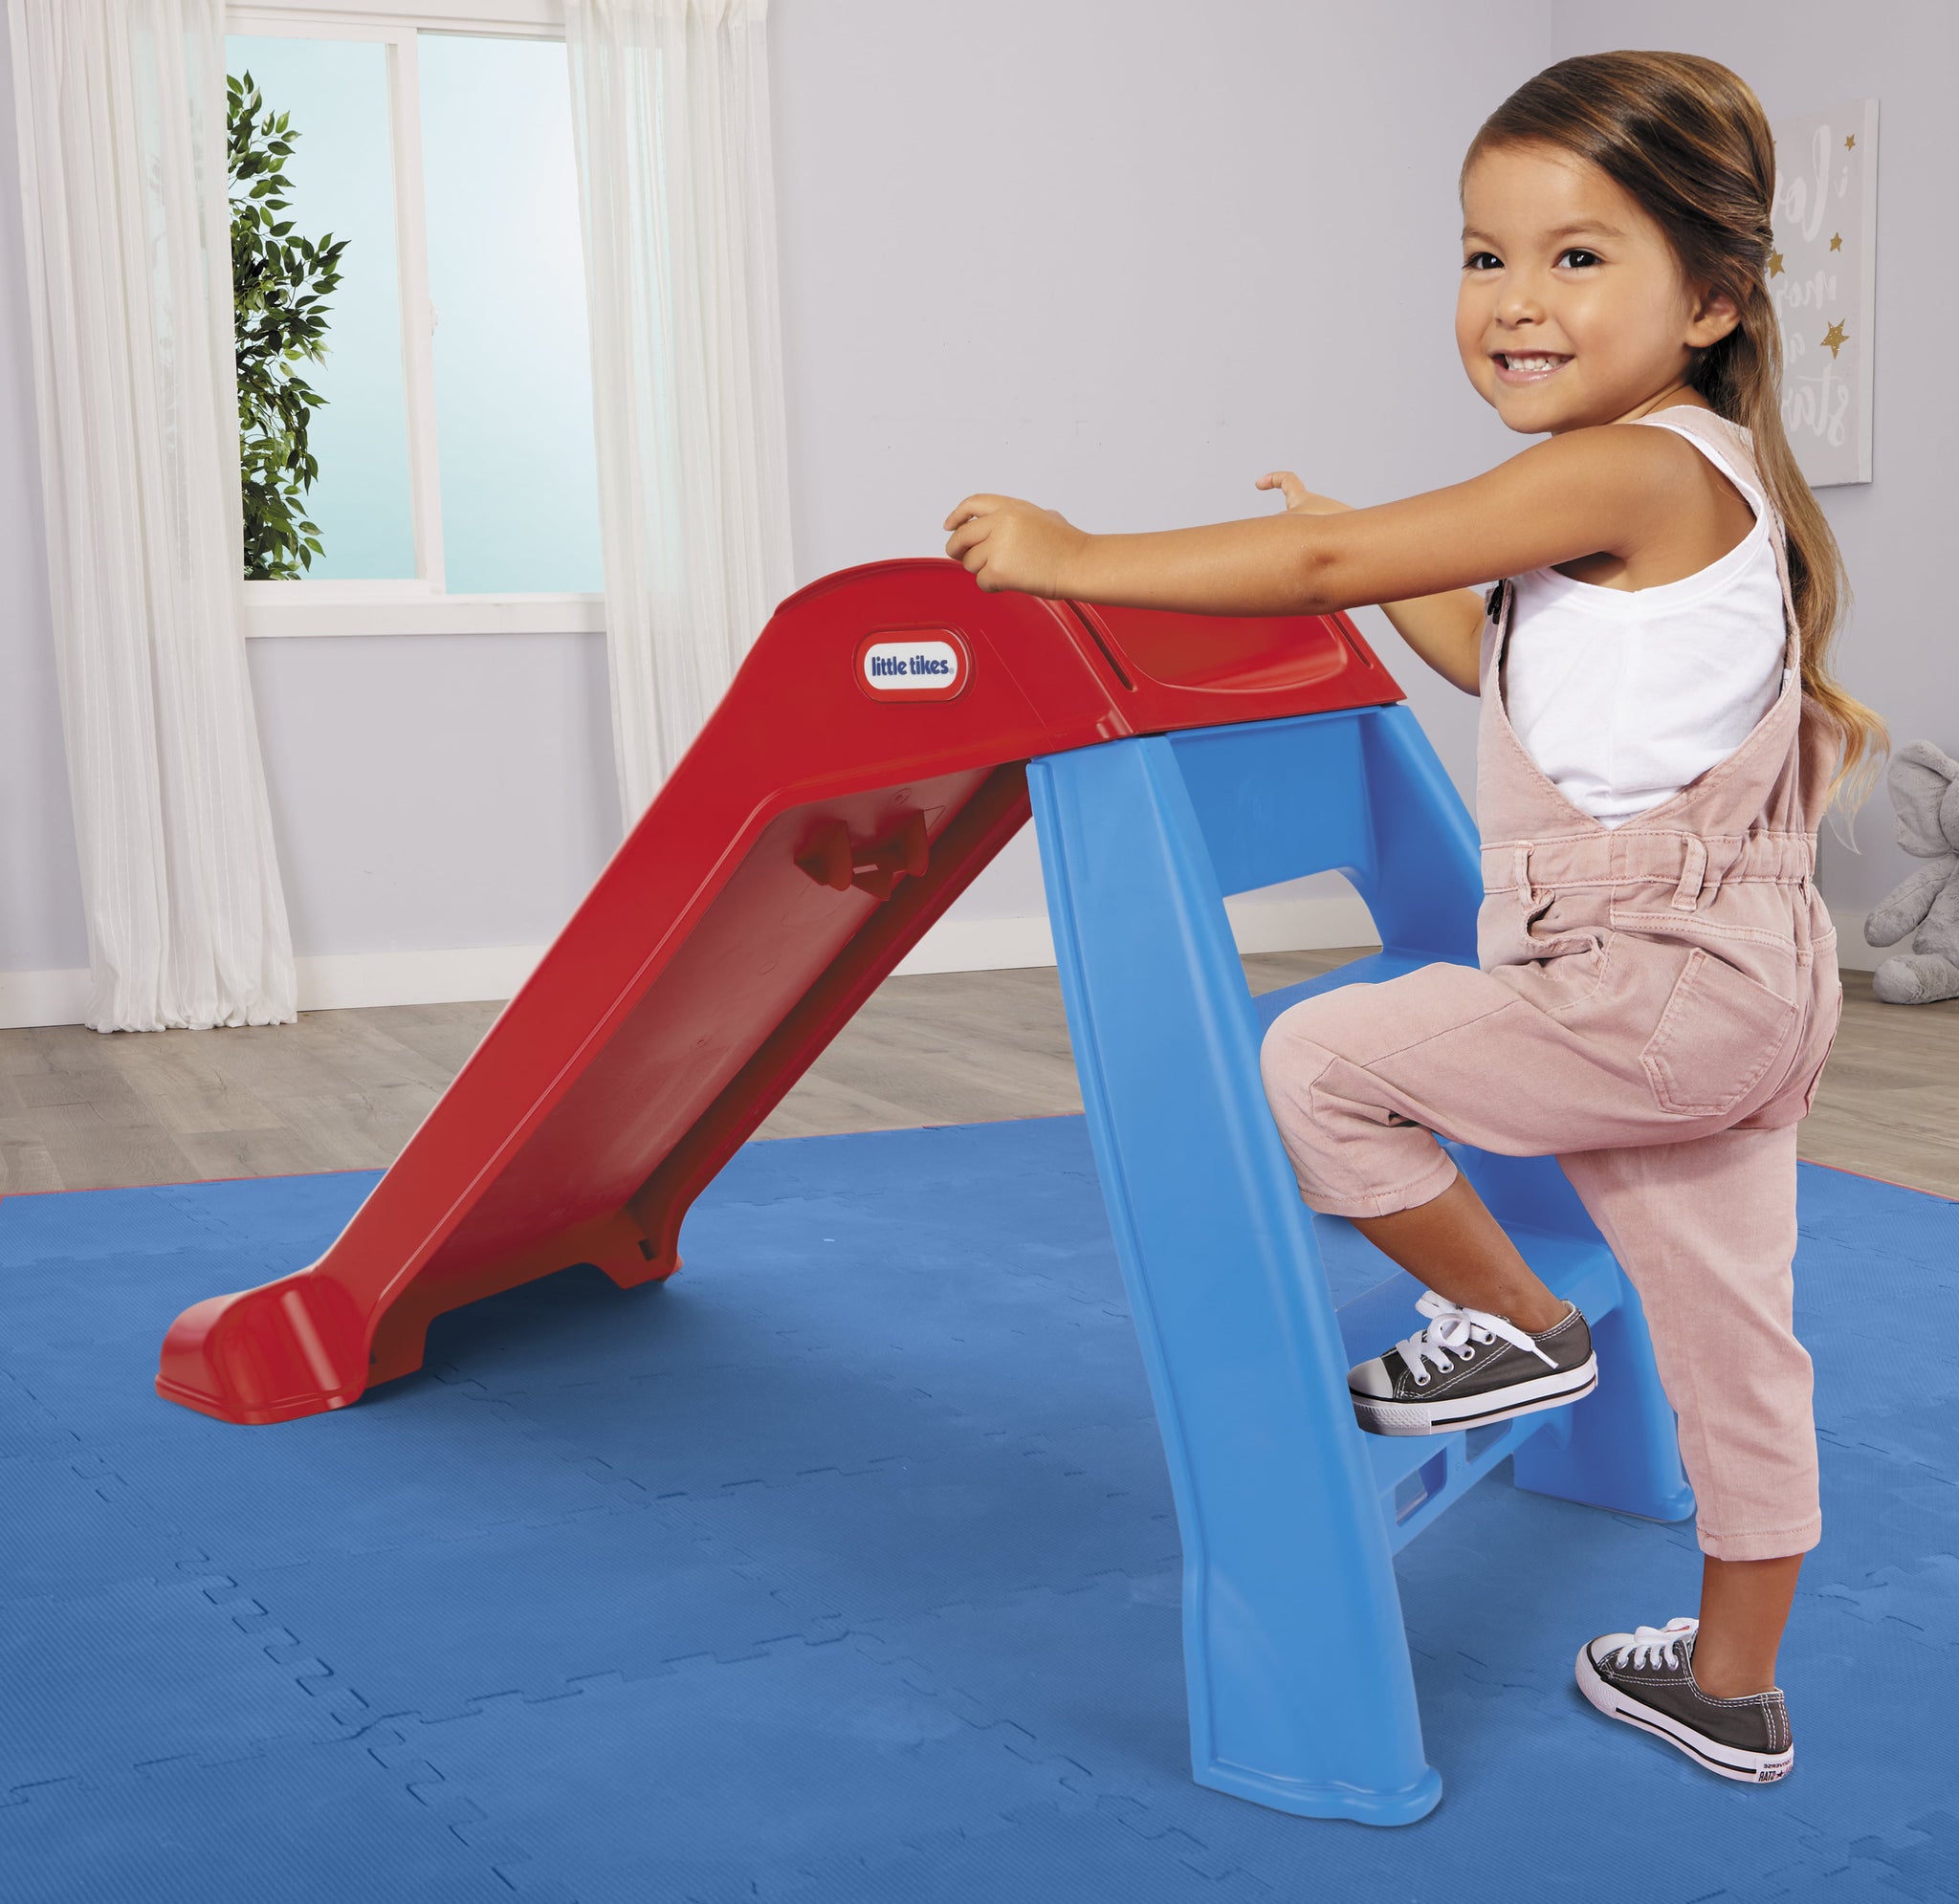 image 4 of Little Tikes First Slide for Kids, Easy Set Up for Indoor Outdoor, Easy to Store, for Toddlers Ages 18 Months - 6 years